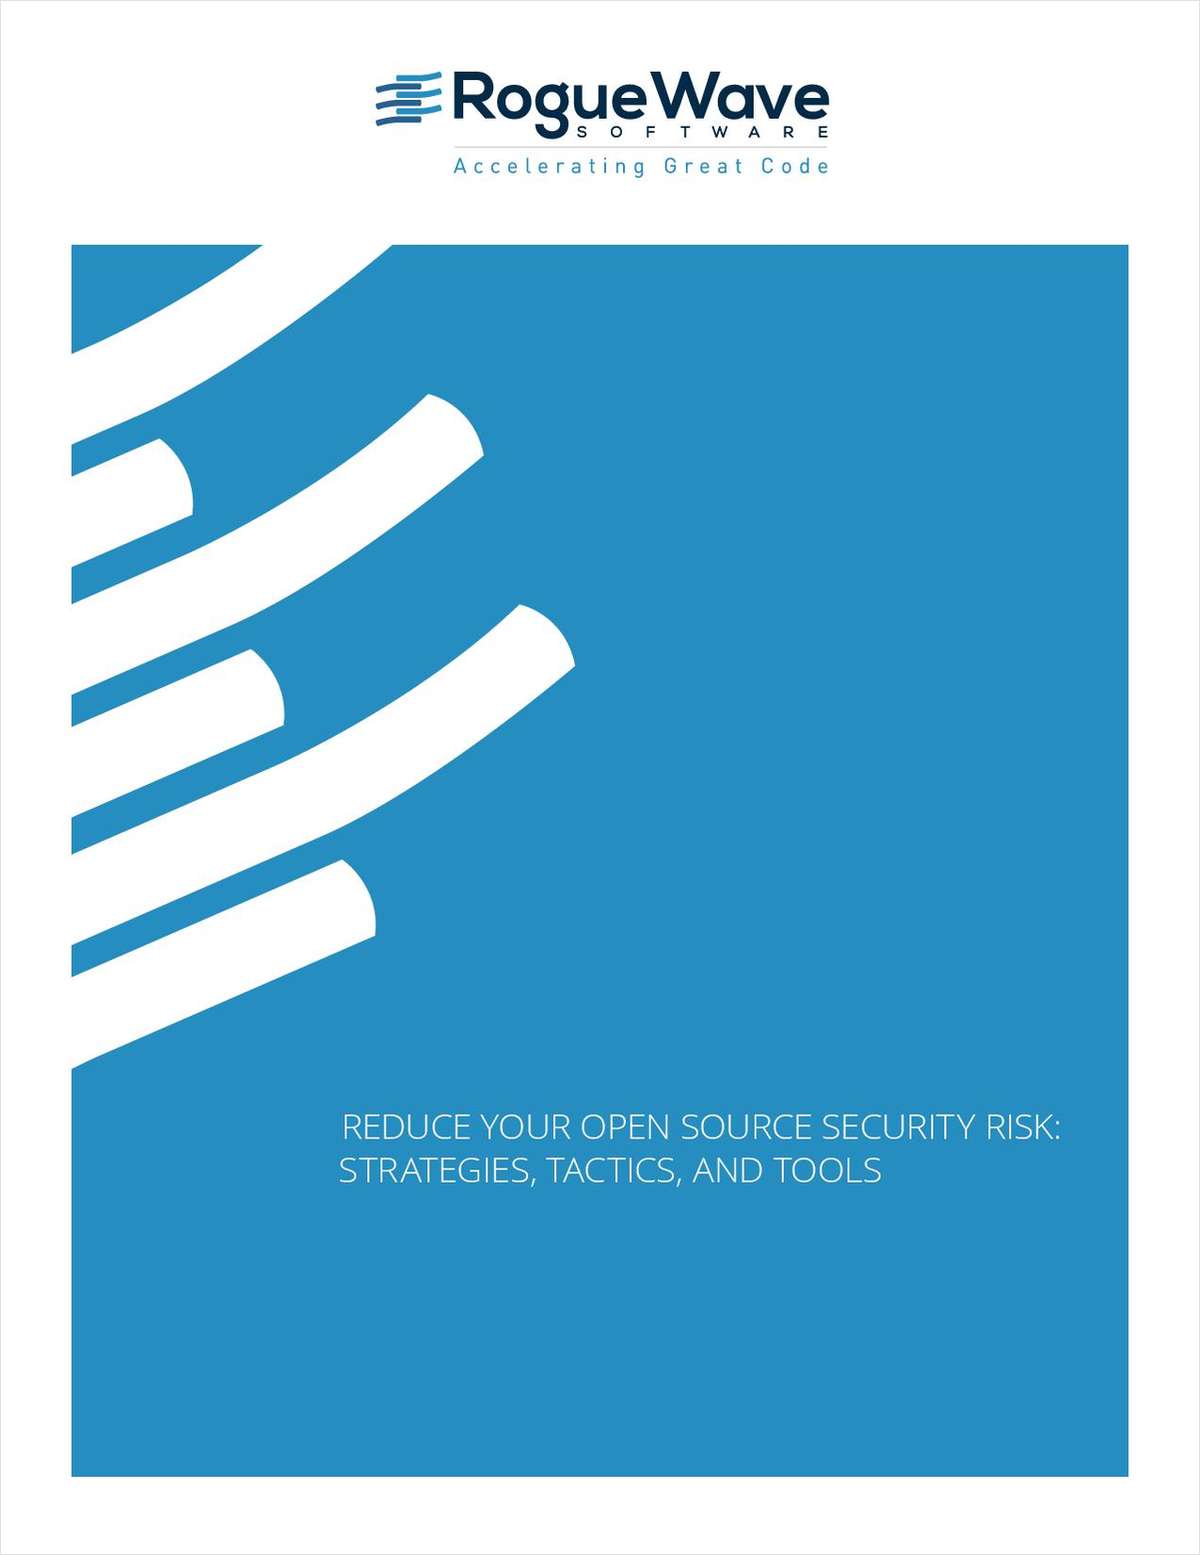 Reduce Your Open Source Security Risk: Strategies, Tactics, and Tools